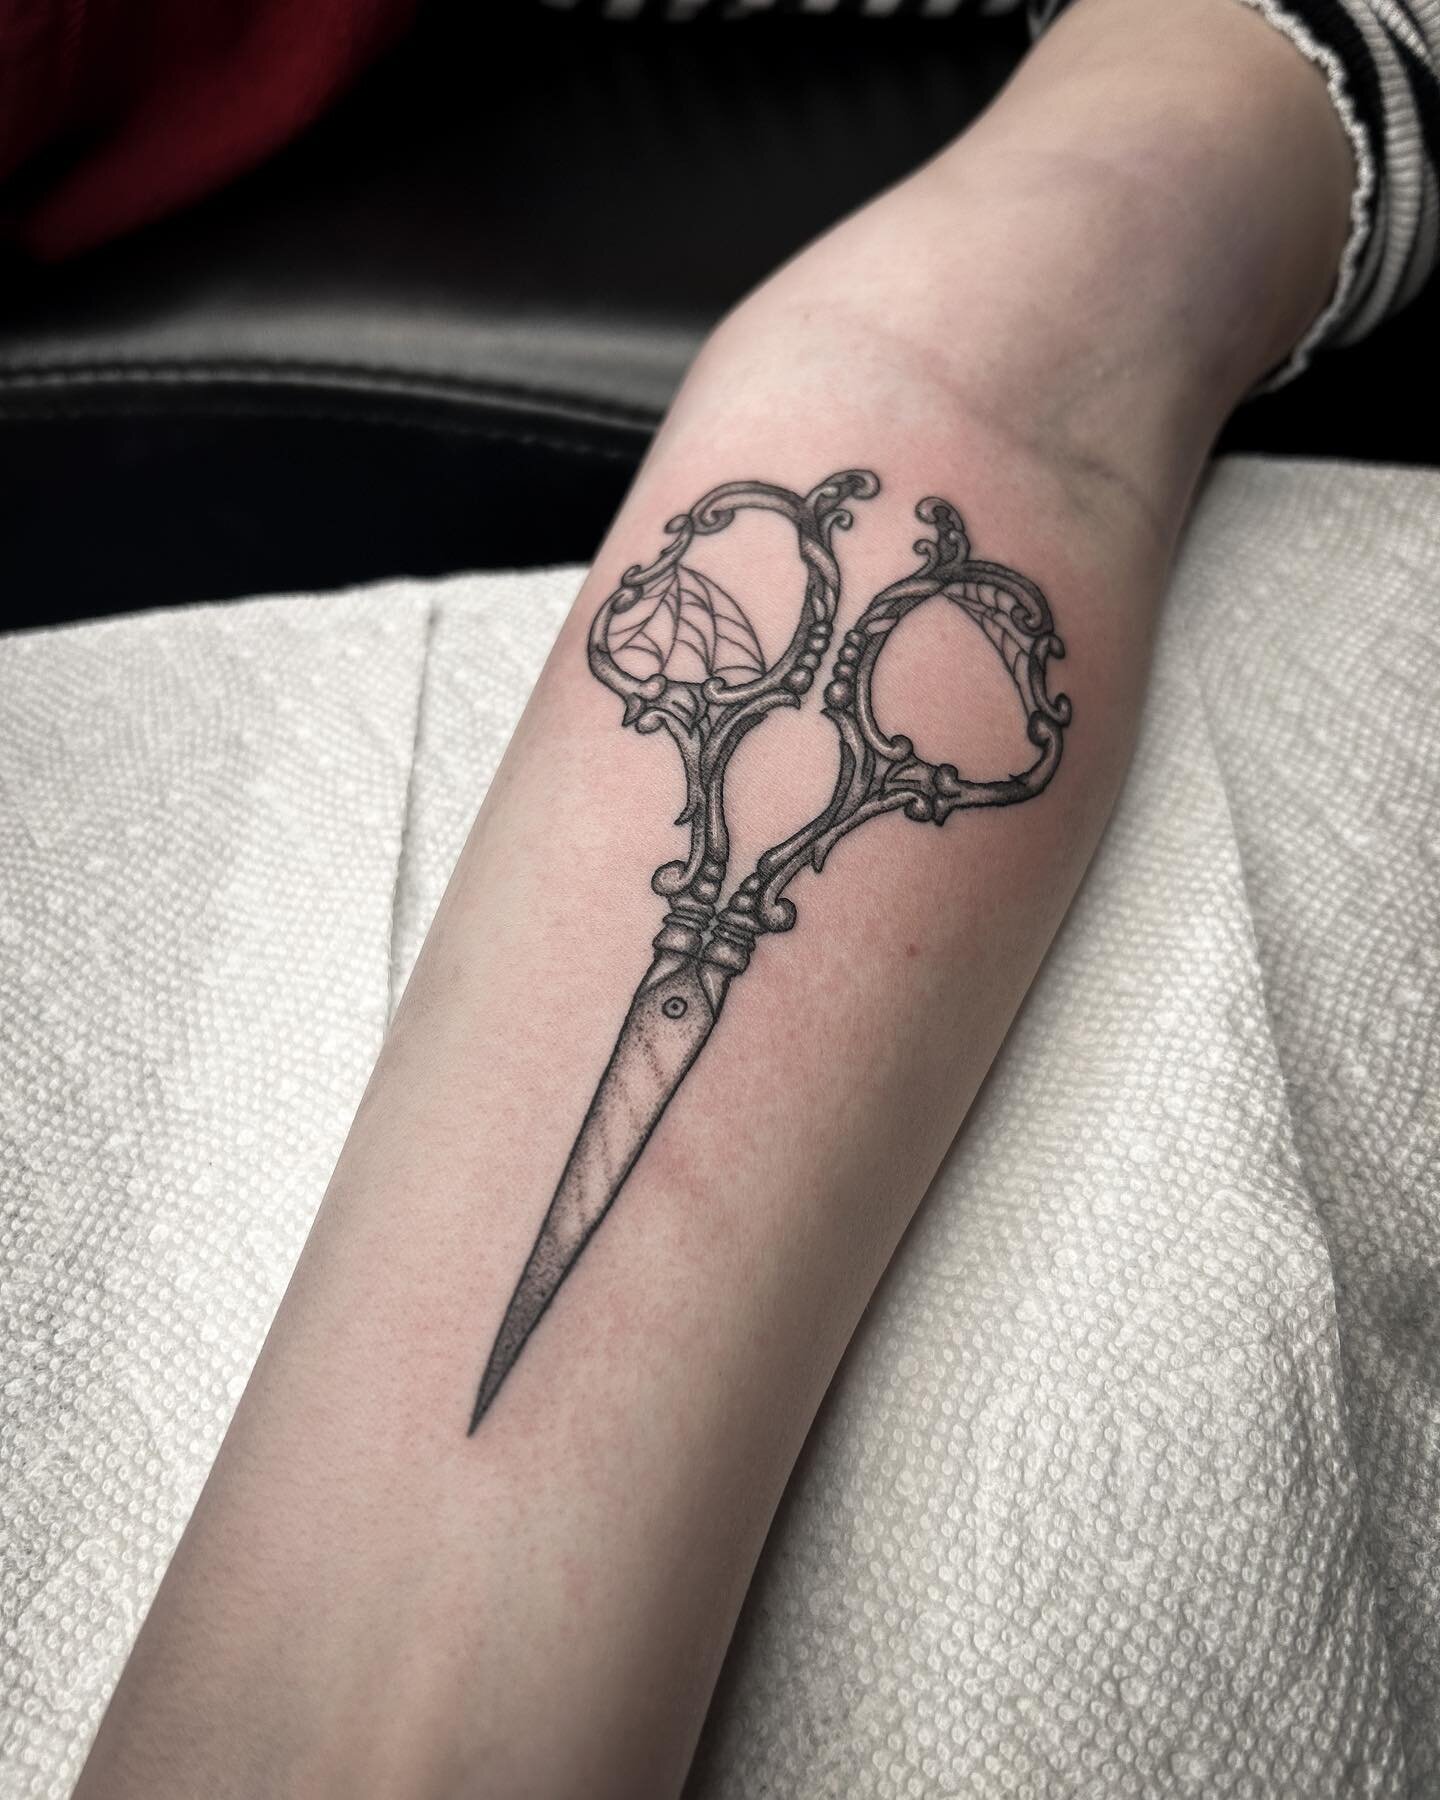 Art n Skin Tattoos - Demand of profession - Arrow and Scissor Tattoo for  our Archer & Hair Stylist client! Little different than regular small  tattoos we do. I wish them more